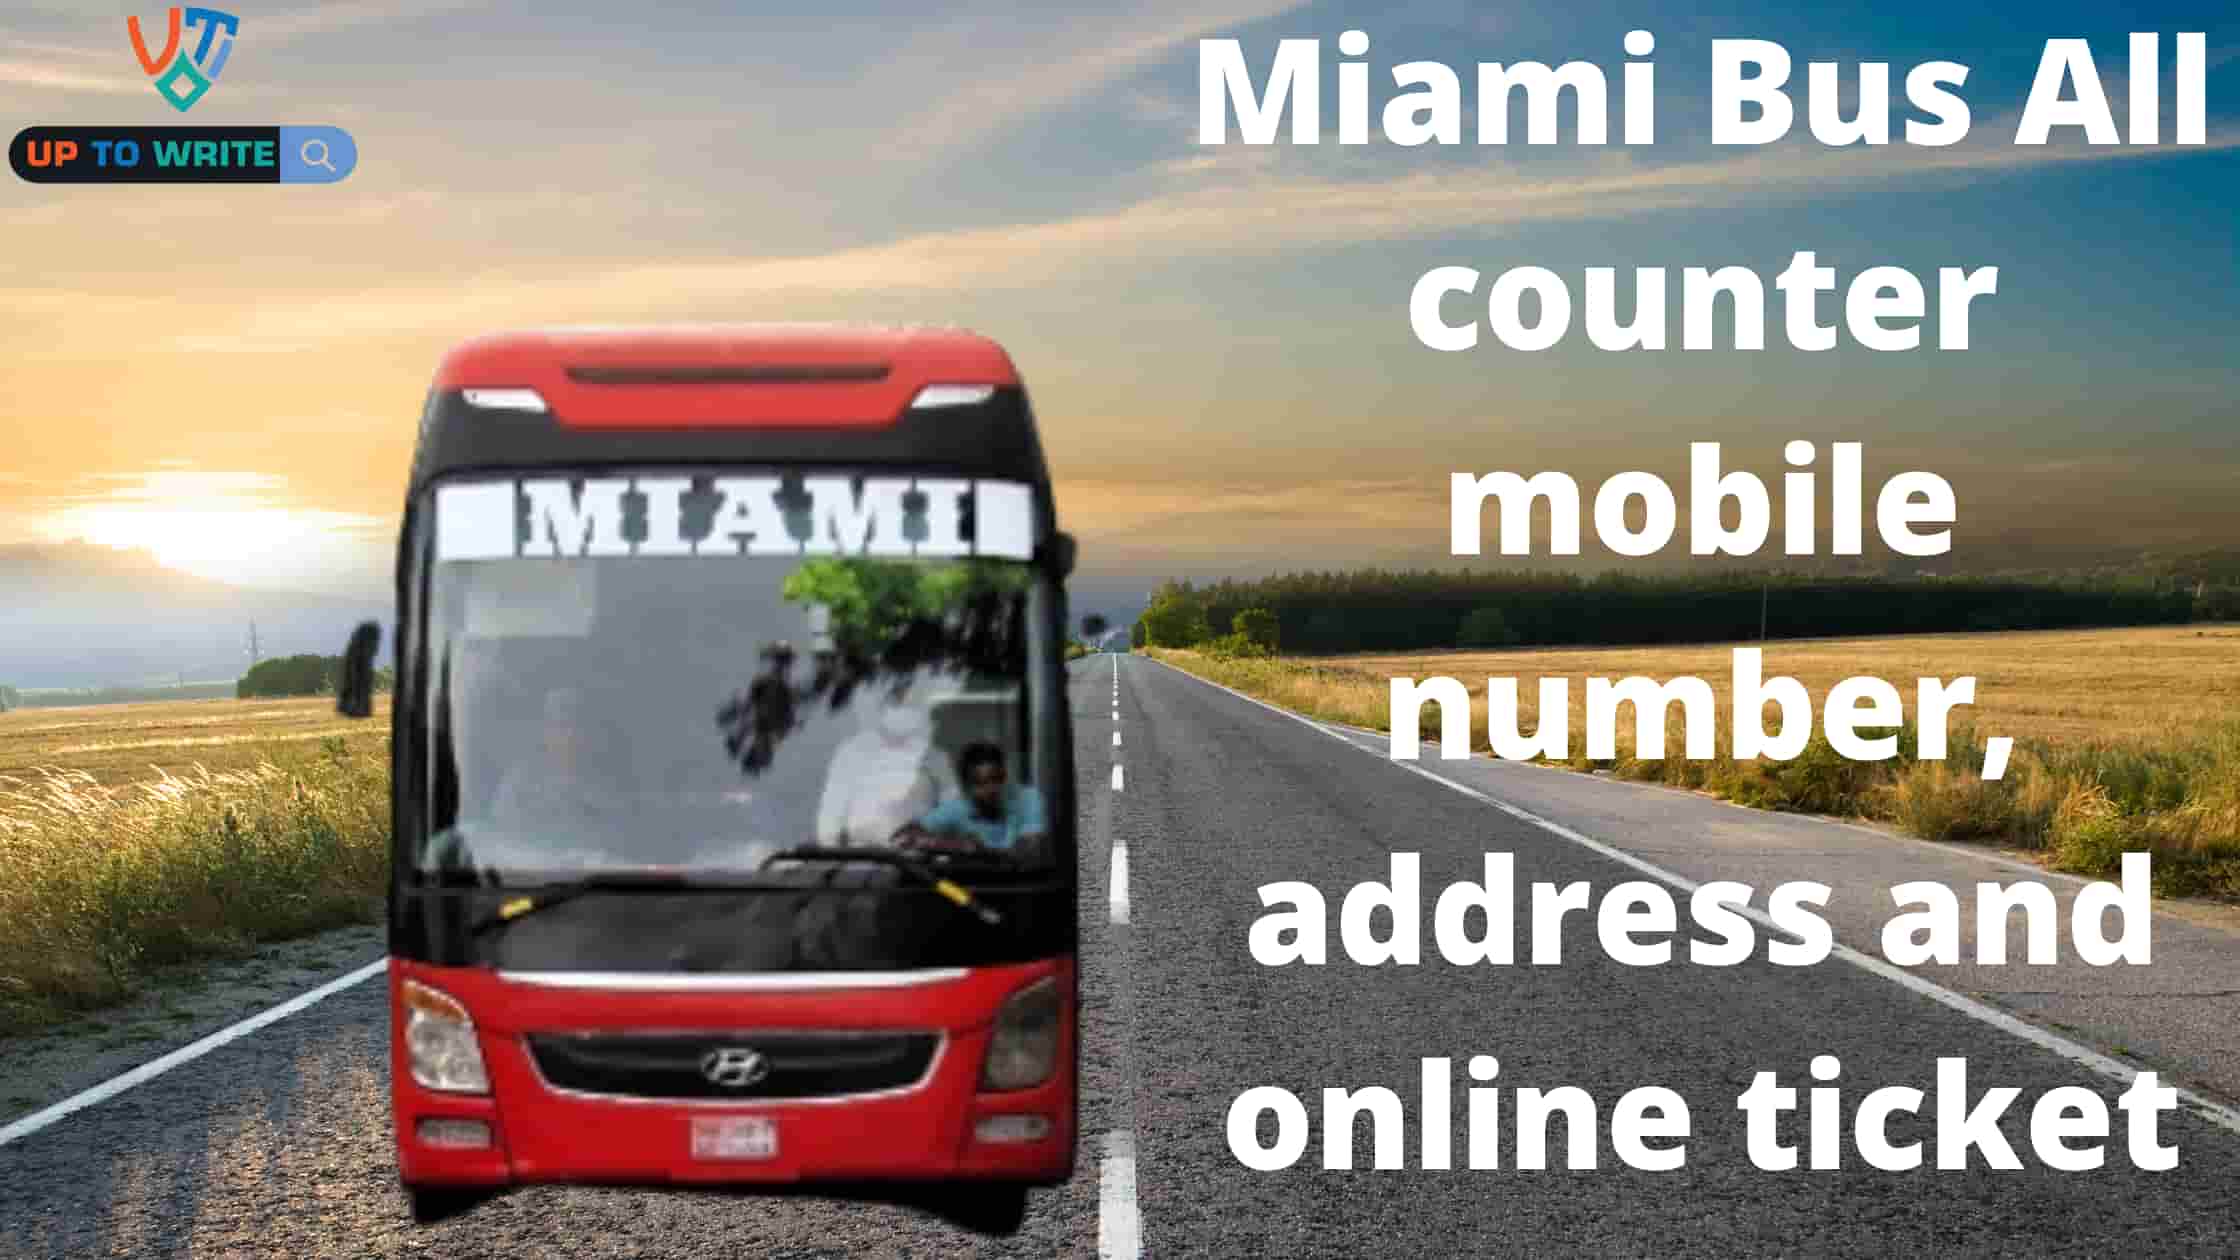 Miami Bus All counter mobile number, address and online ticket